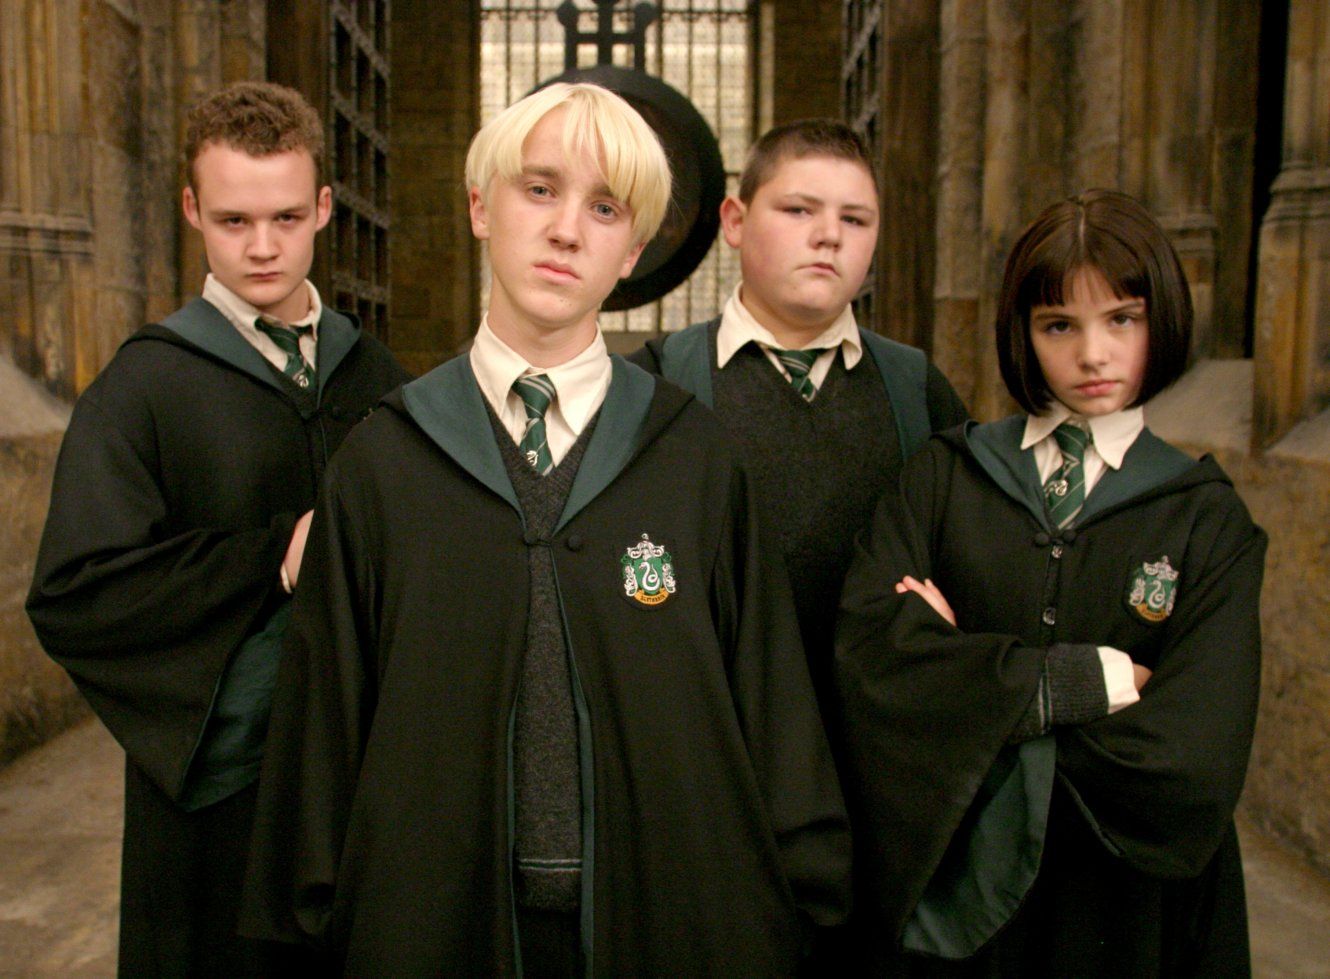 Draco Malfoy, Vincent Crabbe, Gregory Goyle, and Pansy Parkinson stare threateningly into the camera.